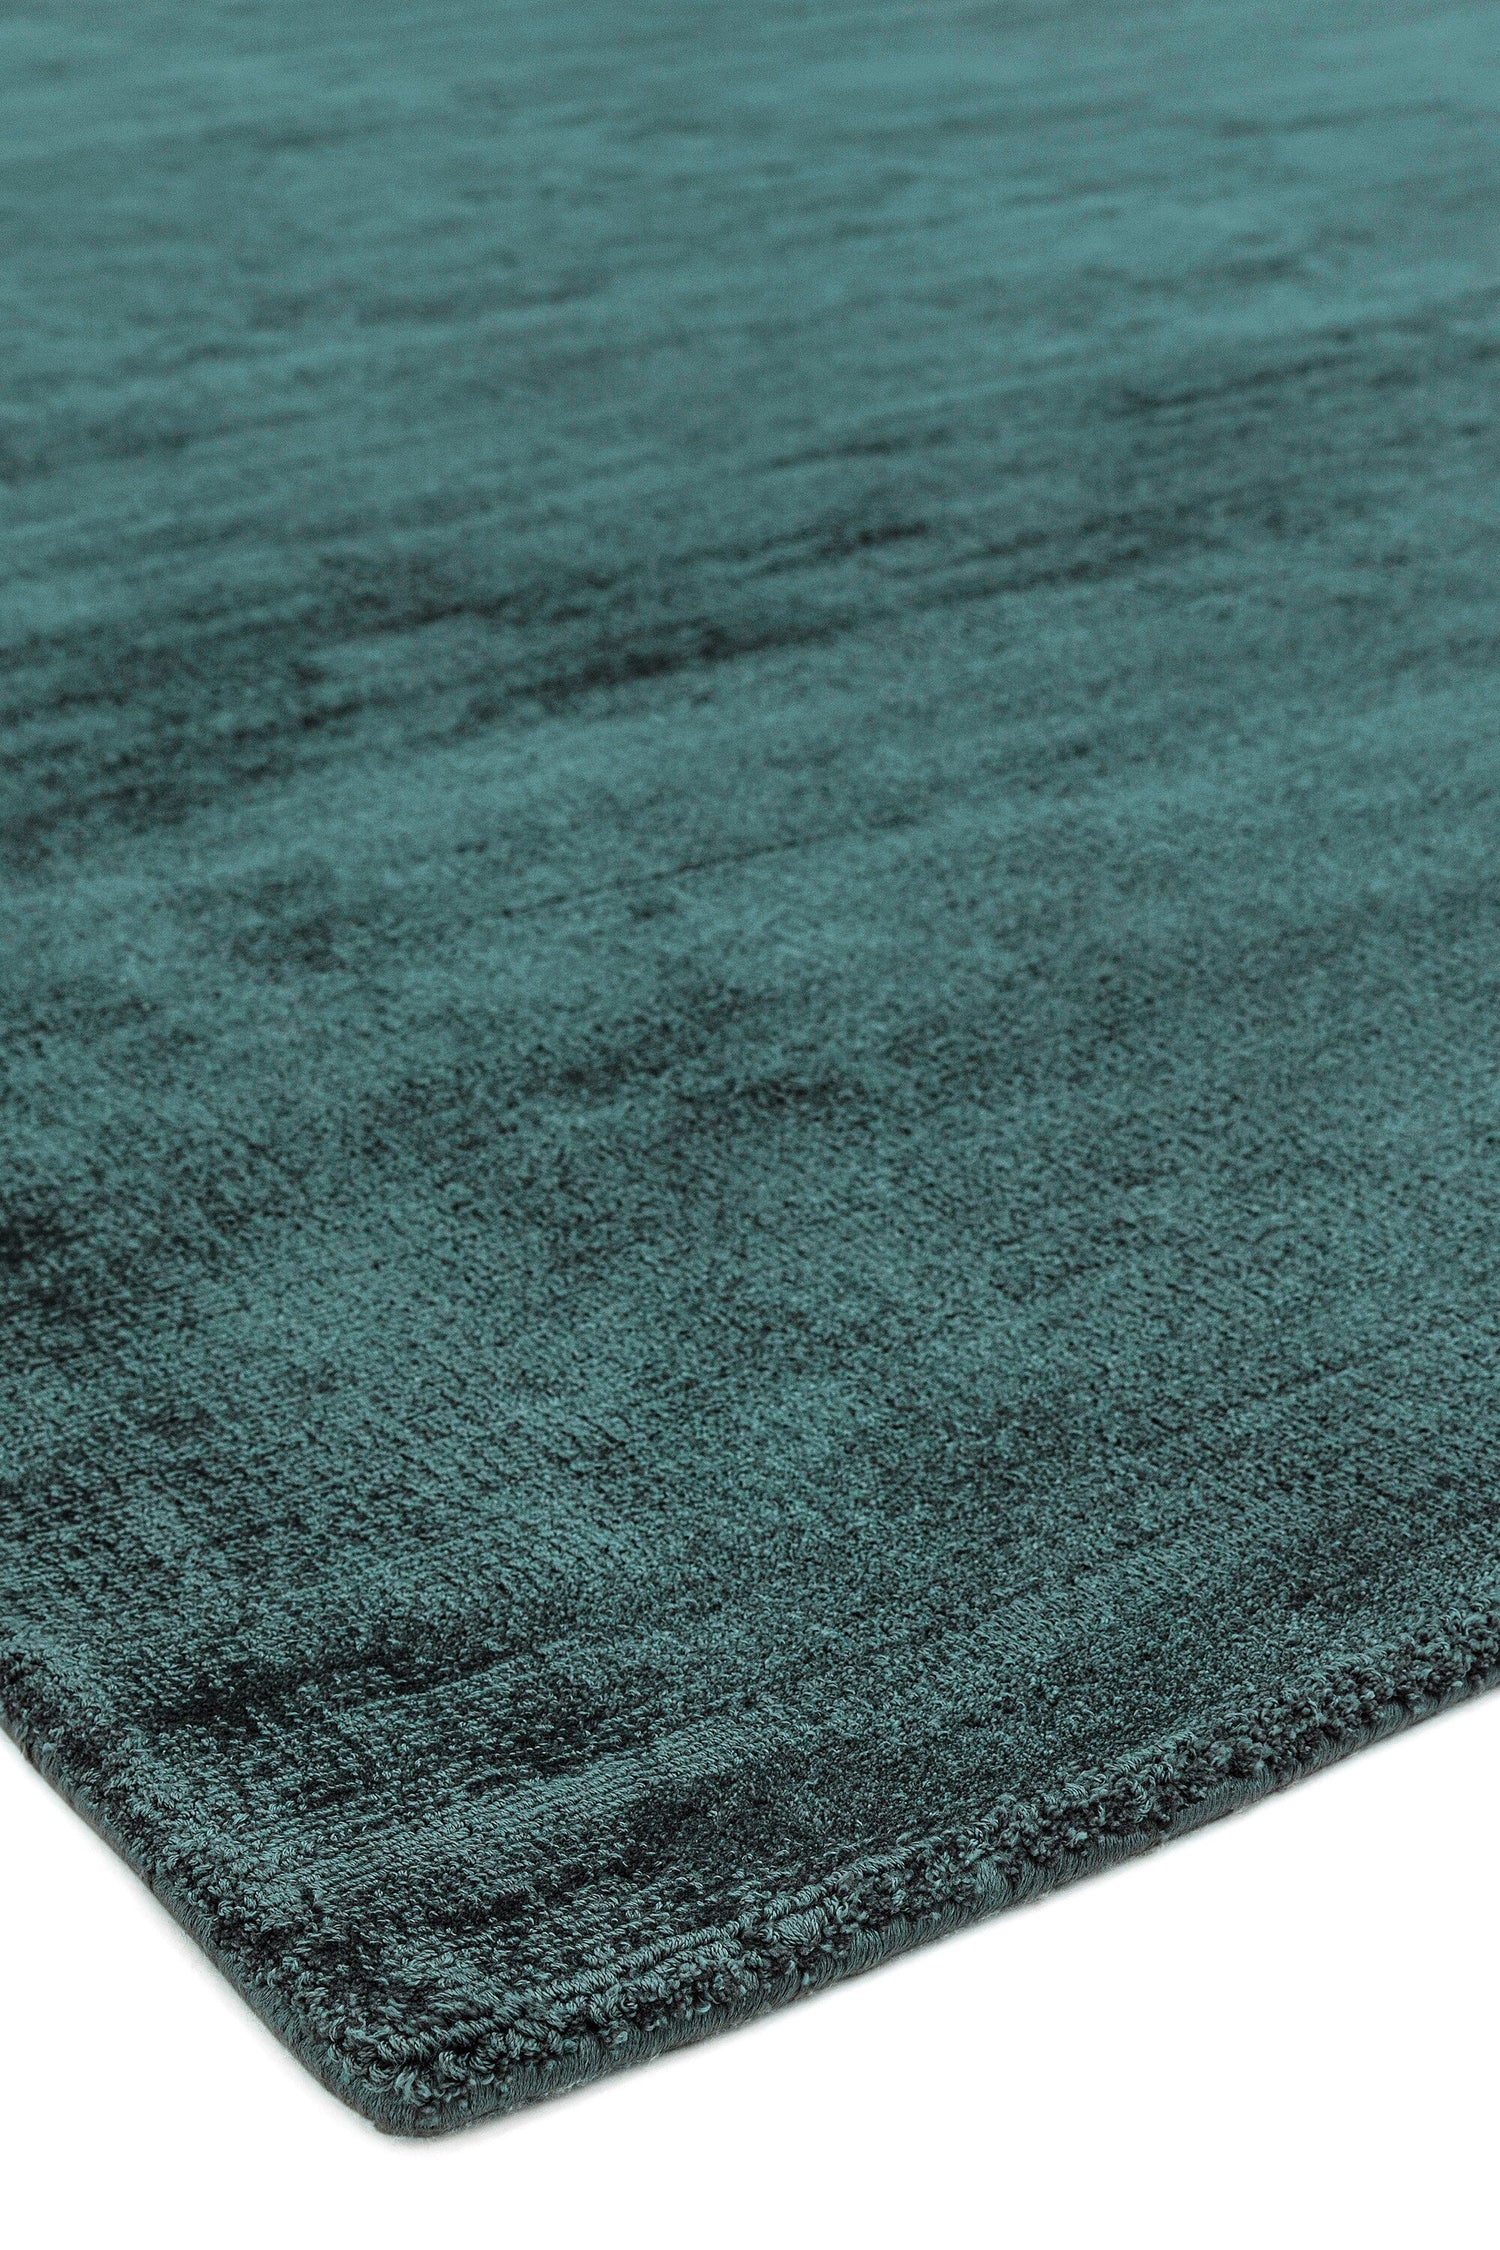  Asiatic Carpets-Asiatic Carpets Blade Hand Woven Runner Teal - 66 x 240cm-Green 829 